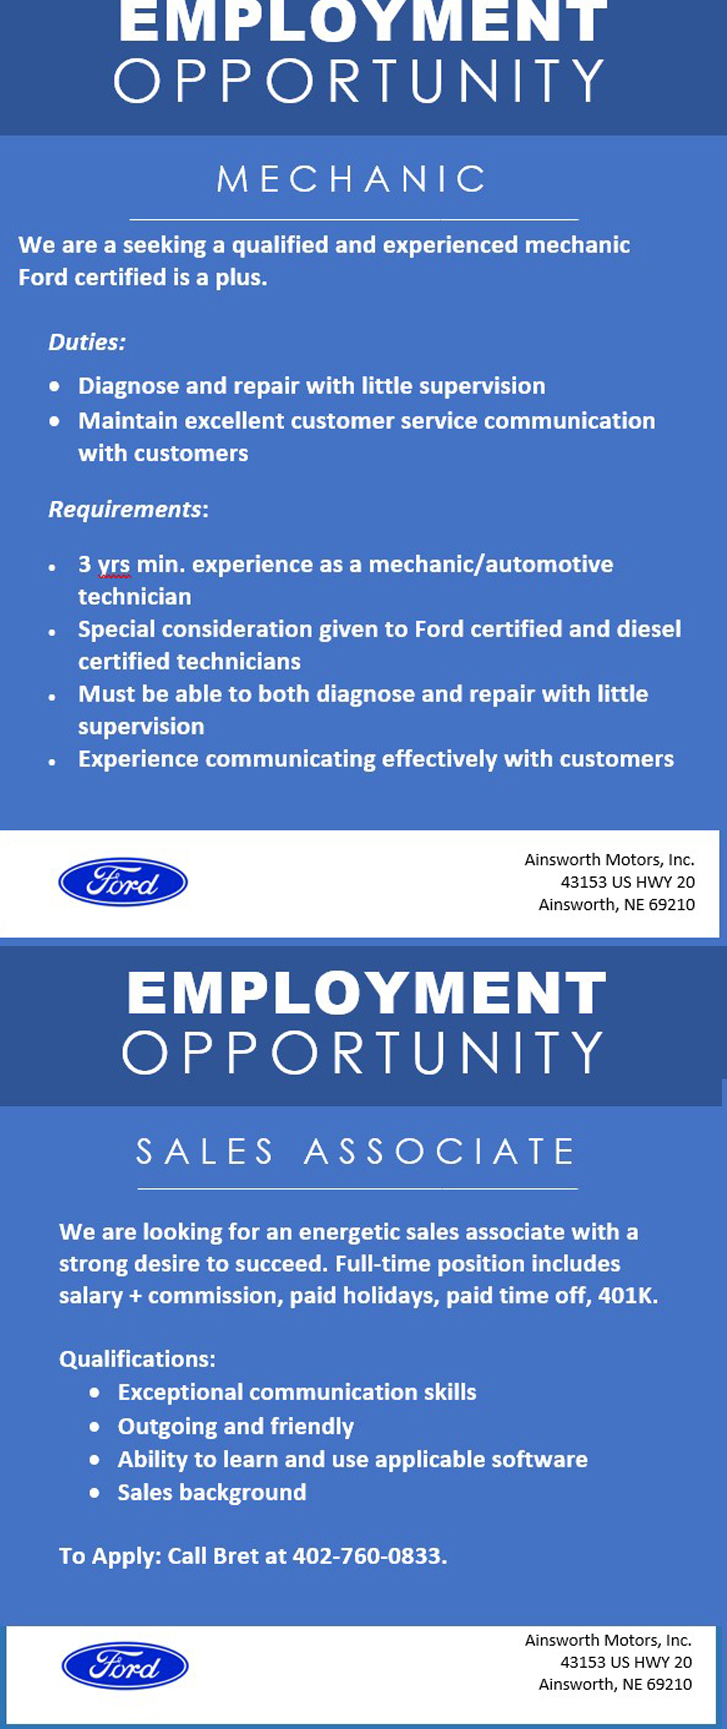 Employment opportunity